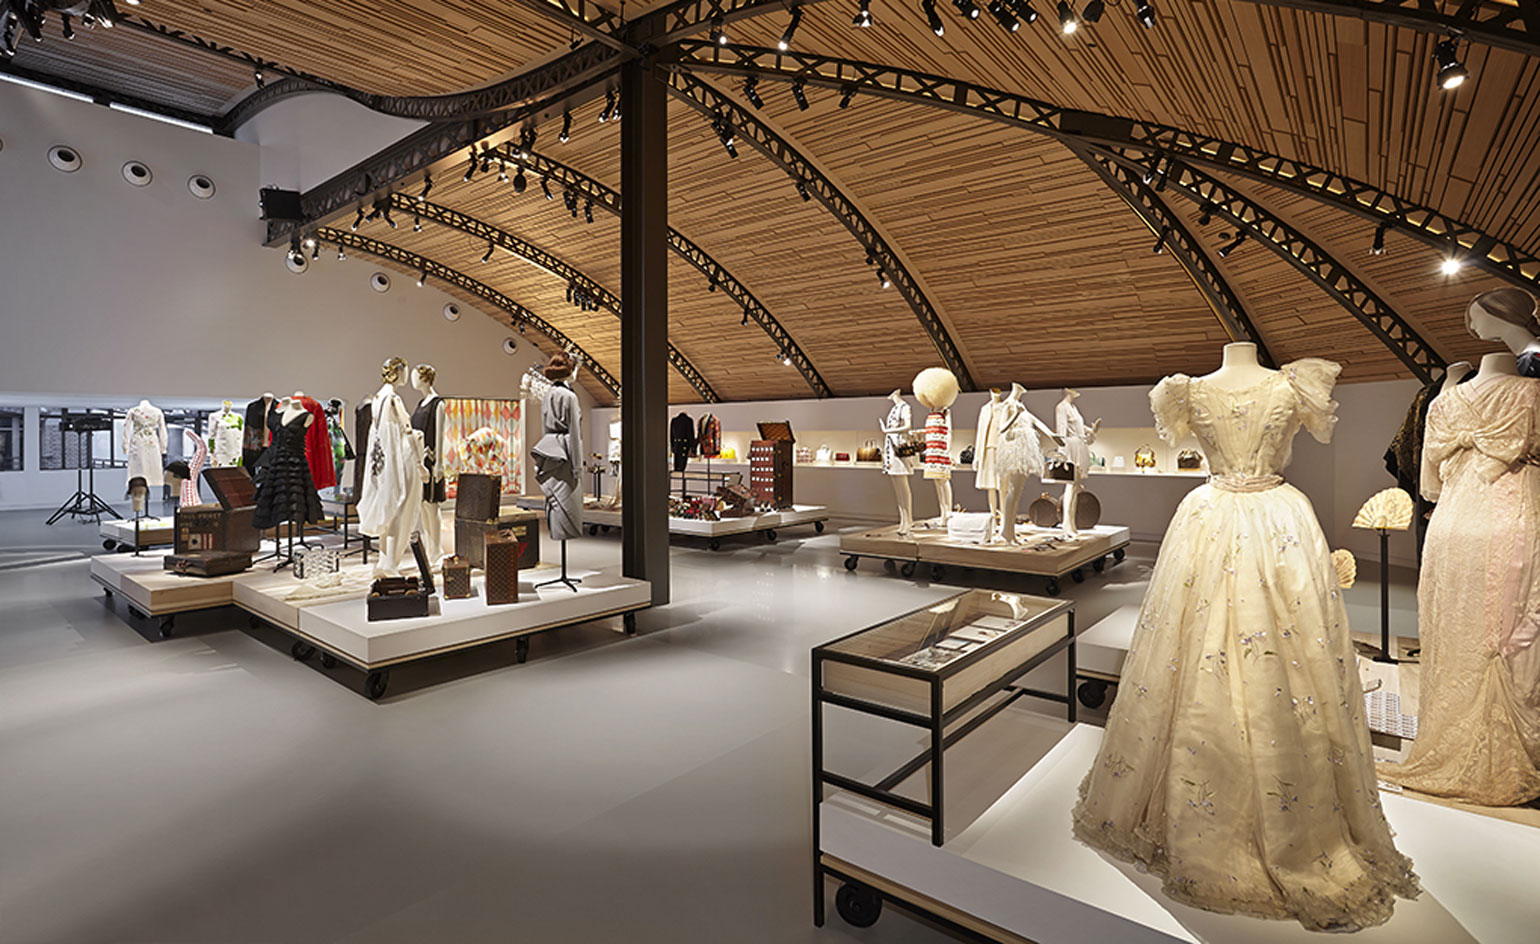 The heart of Louis Vuitton: an exhibition of themes from the